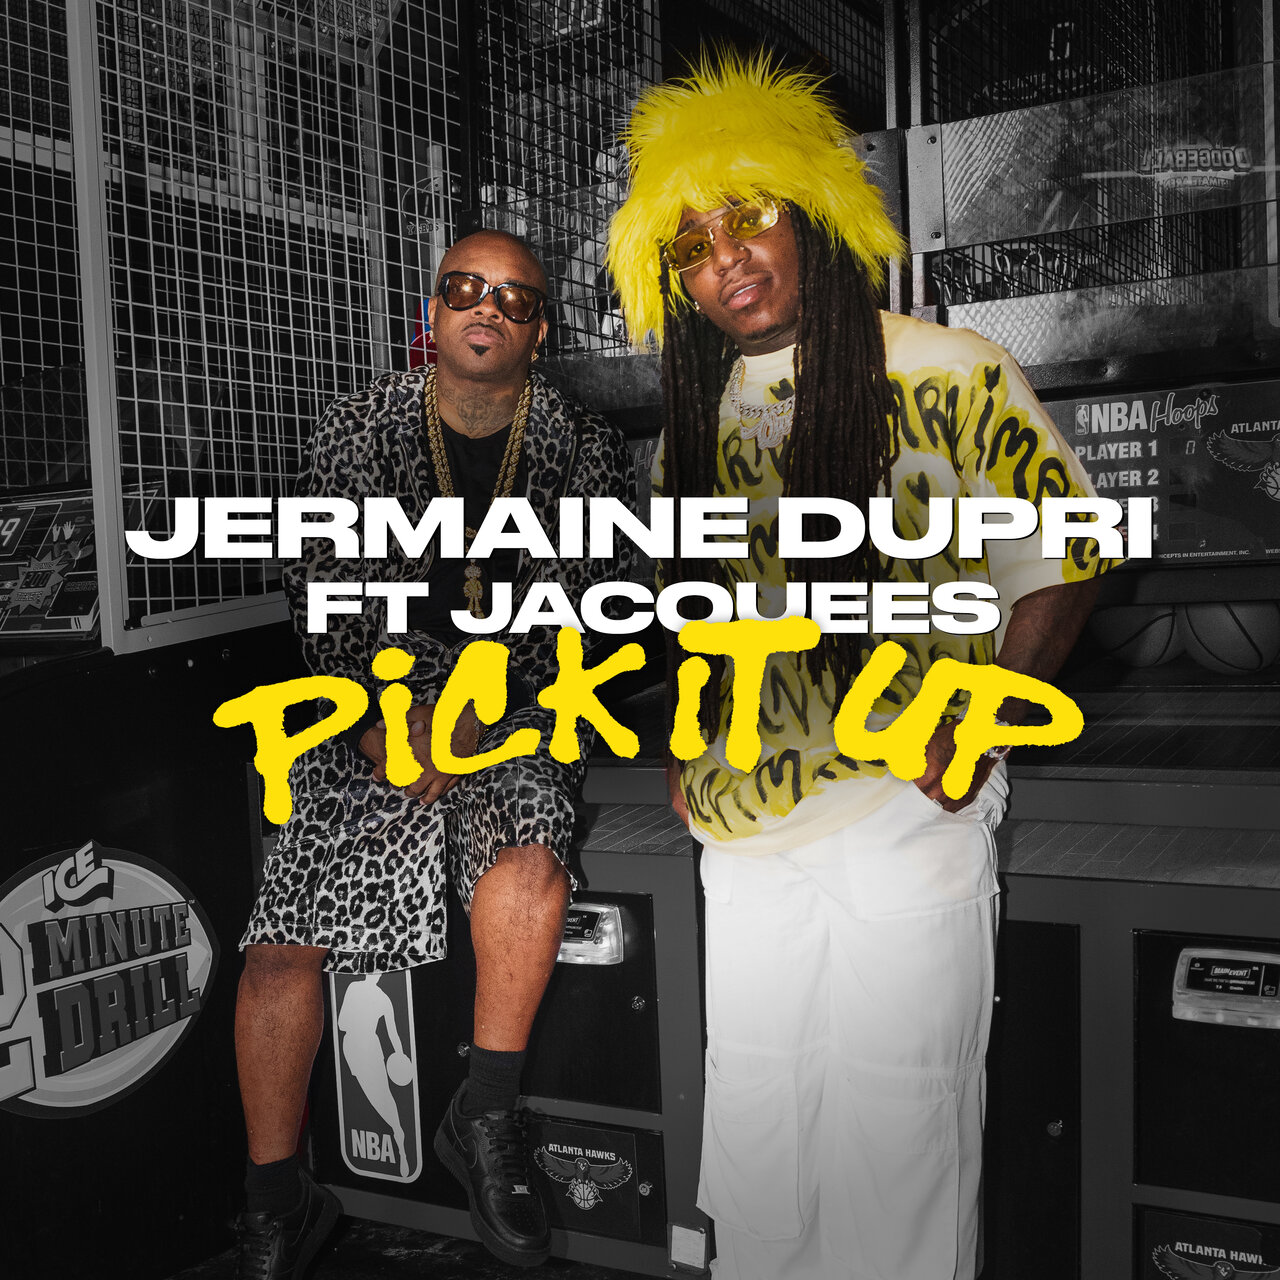 Jermaine Dupri And Jacquees Create A Bouncy Love Song With “Pick It Up”